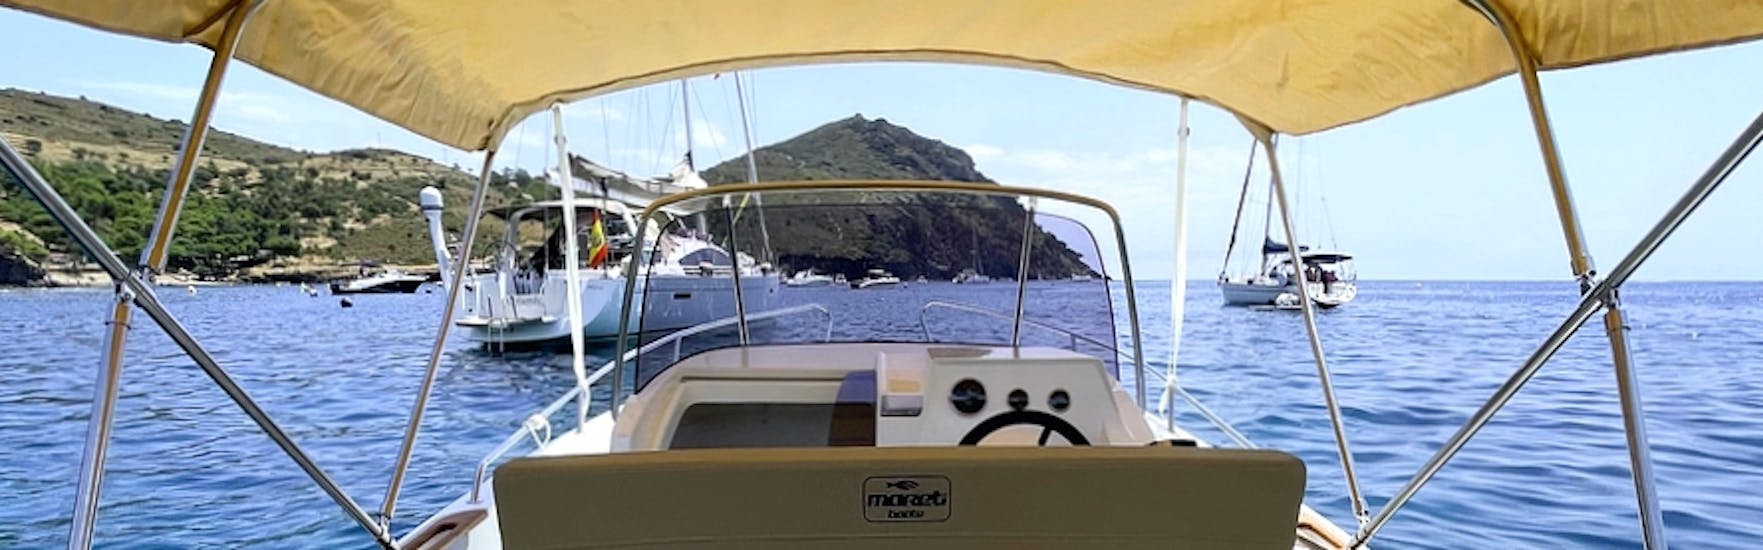 The modern MARETI 600 OPEN boat cruising on the blue waters of the bay of roses during a boat rental in Costa Brava for up to 7 people with licence with Maxi Boats.